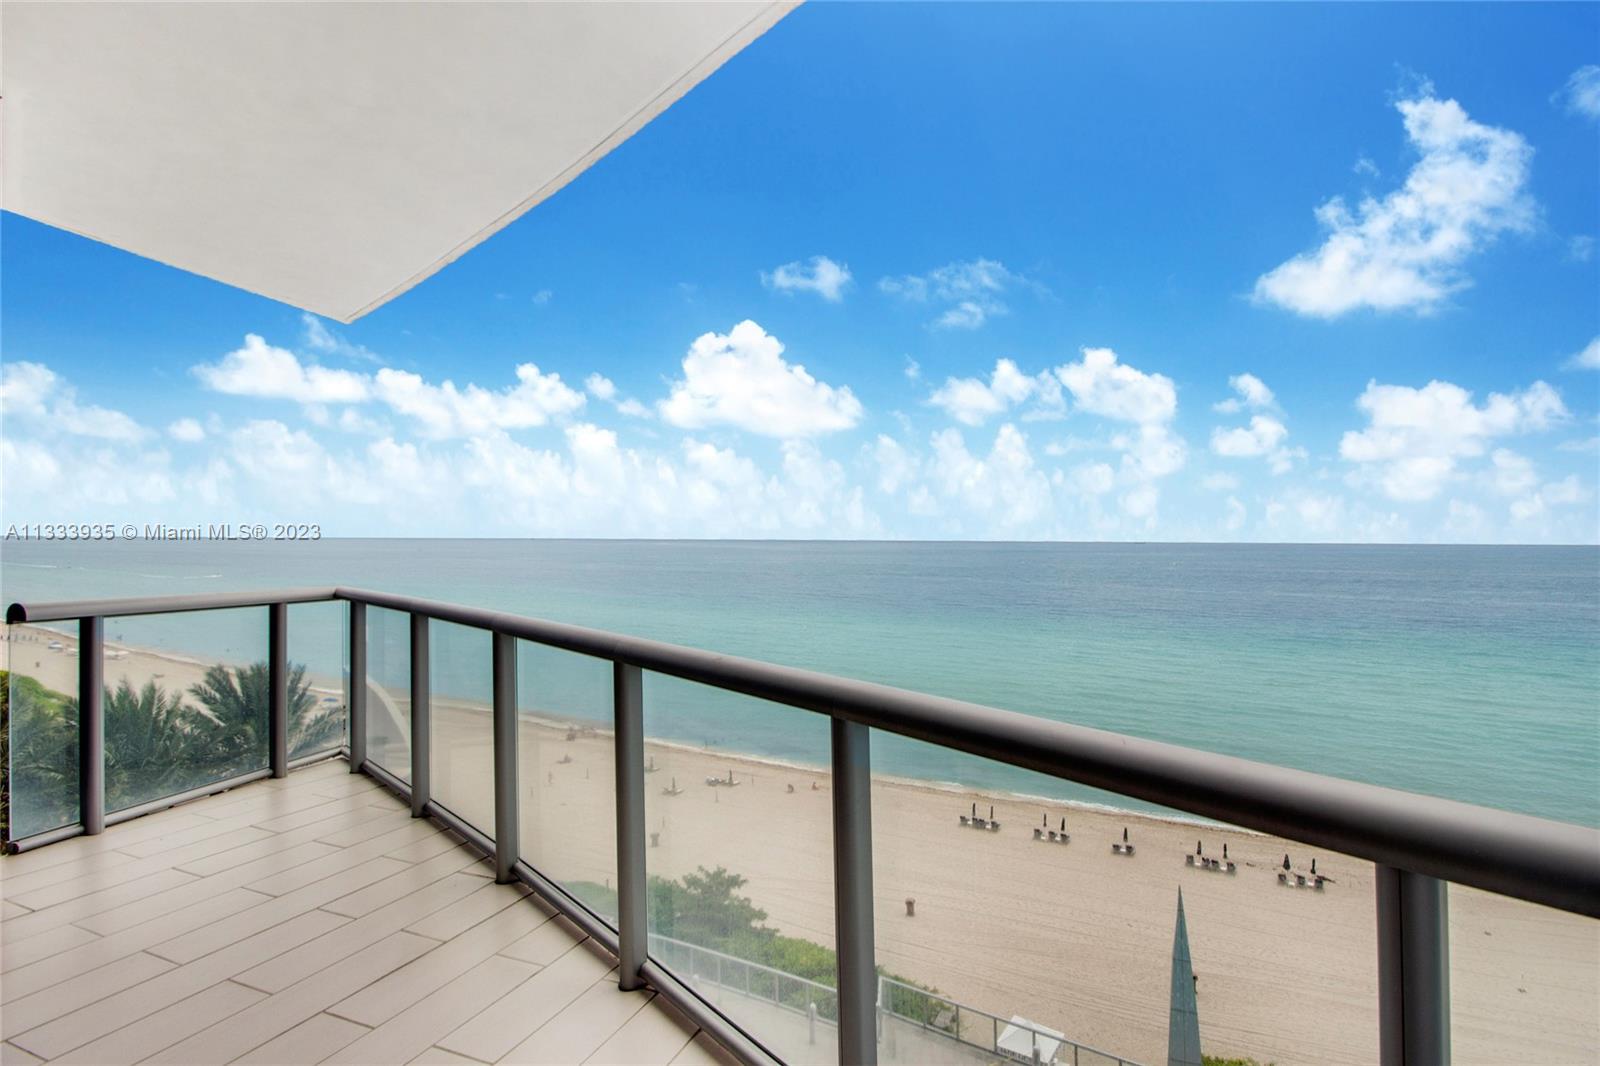 RESORT-LIKE MOMENTS AT JADE OCEAN. This flawless direct oceanview condo is located in the heart of Sunny Isles Beach. Manicured spa-like living nestled within a private and luxurious complex with private beach access. As a resident, you will have access to lifestyle spa amenities including a spectacular pool, gym, EV charging with valet, and concierge service. The open plan features 3 bedrooms with a master bedroom that has amazing direct ocean views with two walk-in closets. The stunning living/dining room opens up to the prevailing kitchen with Miele and Subzero appliances and a wine cooler, lavish bathrooms, a smartly concealed laundry closet, and a balcony that makes taking in the views easy.